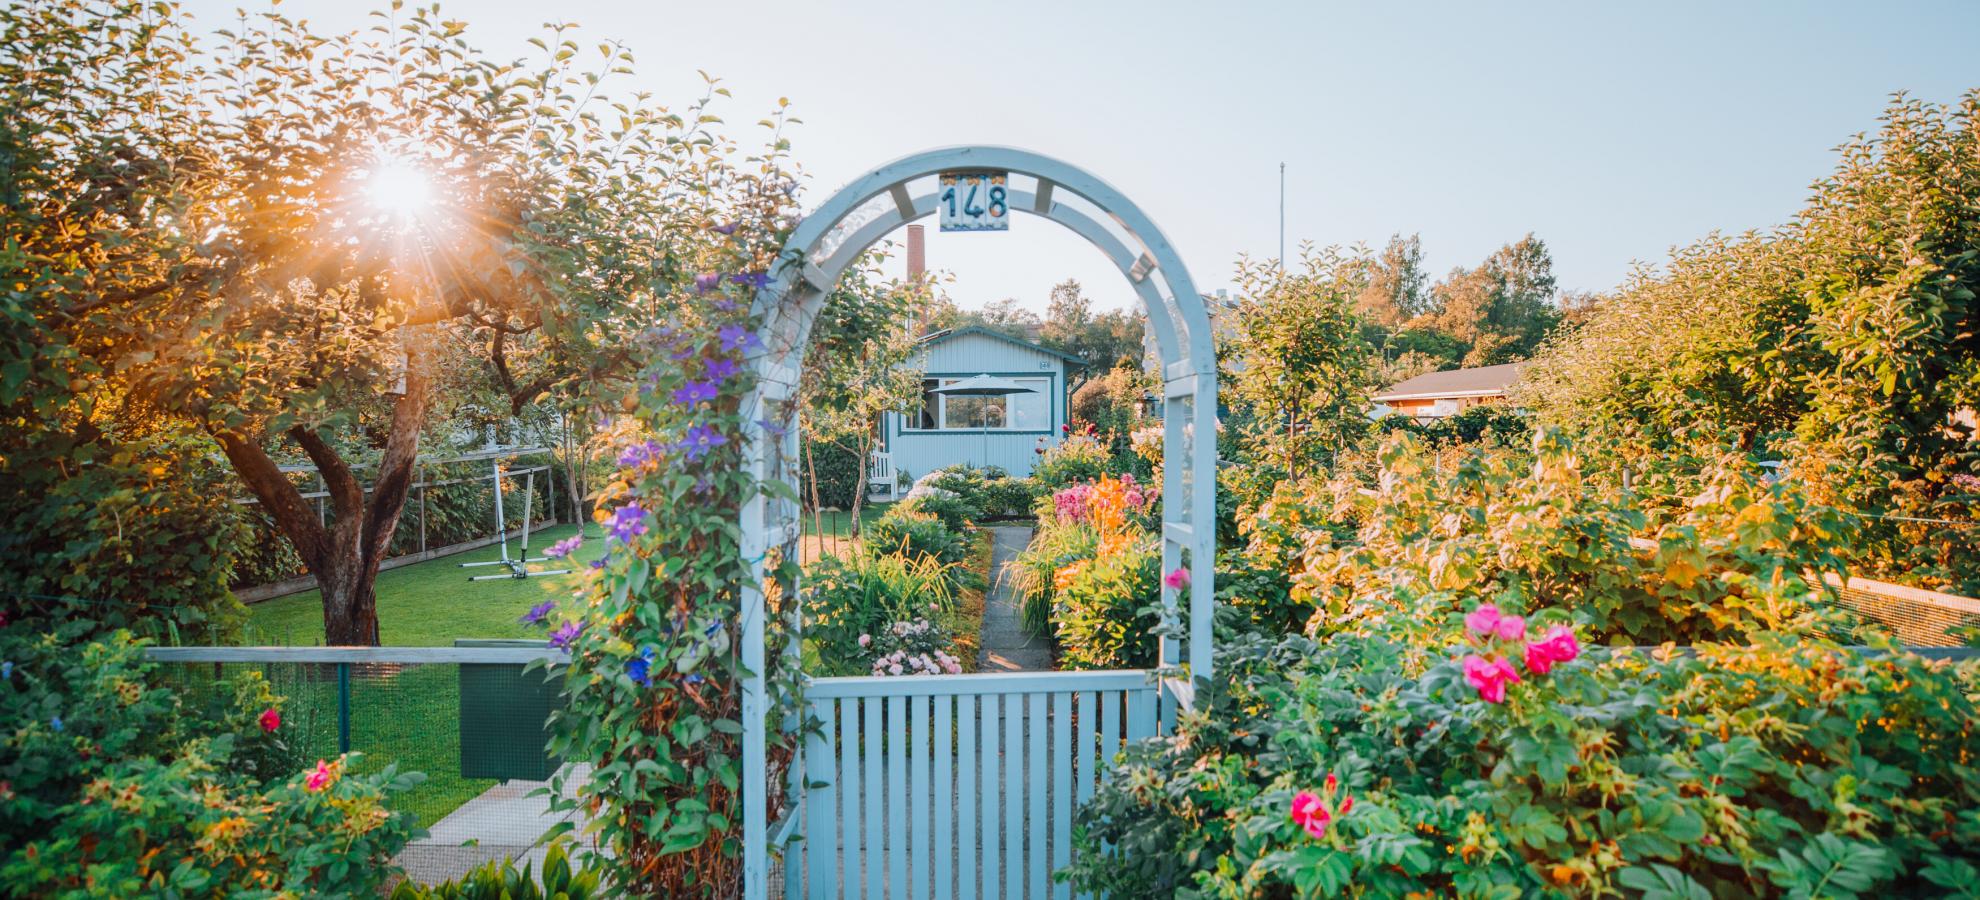 In Kumpula allotment garden a small white gate underneath a white, wooden archway, leads into a beautiful allotment garden in full bloom, surrounded by tall hedges and trees. In the foreground are large flower bushes in blook and at the end of tha path is a small white hut. 